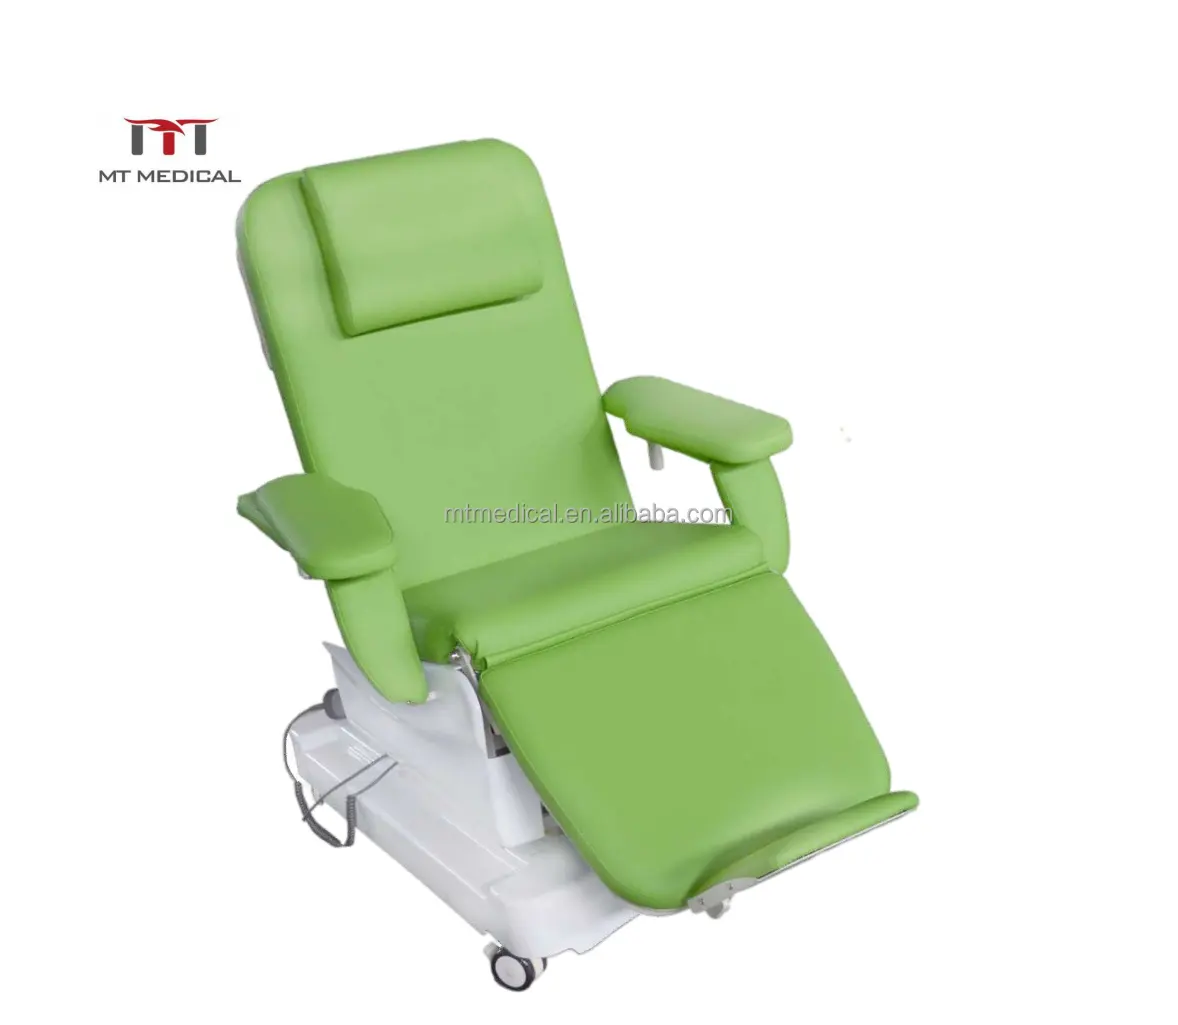 MT Medical Hospital Chemotherapy Mobile Electric Phlebotomy Donation Collection Infusion Blood Donor chair for hospital